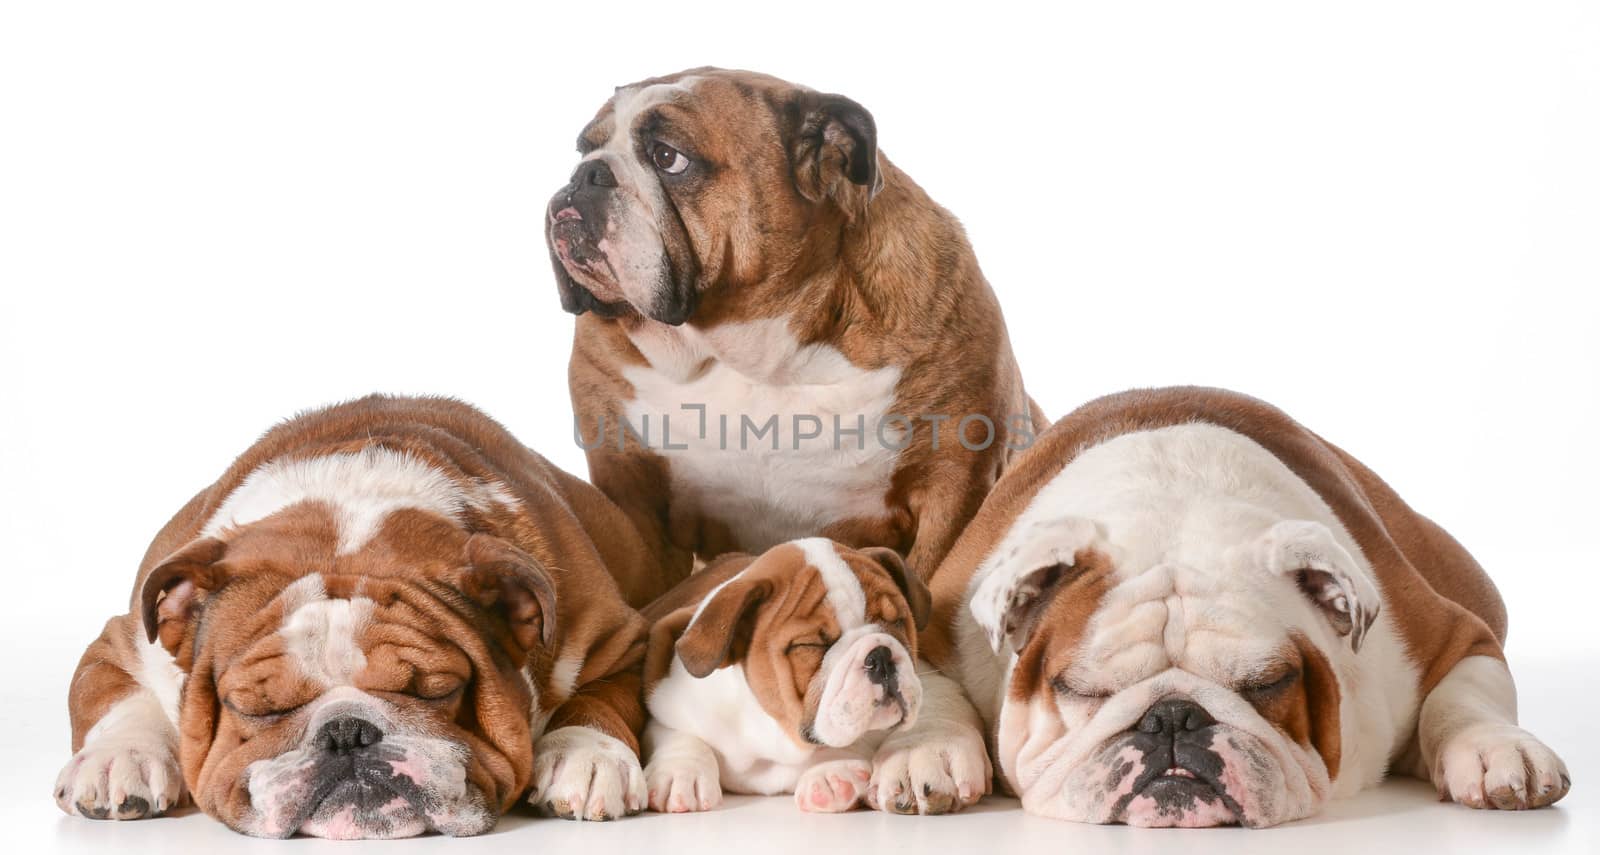 bulldog family by willeecole123